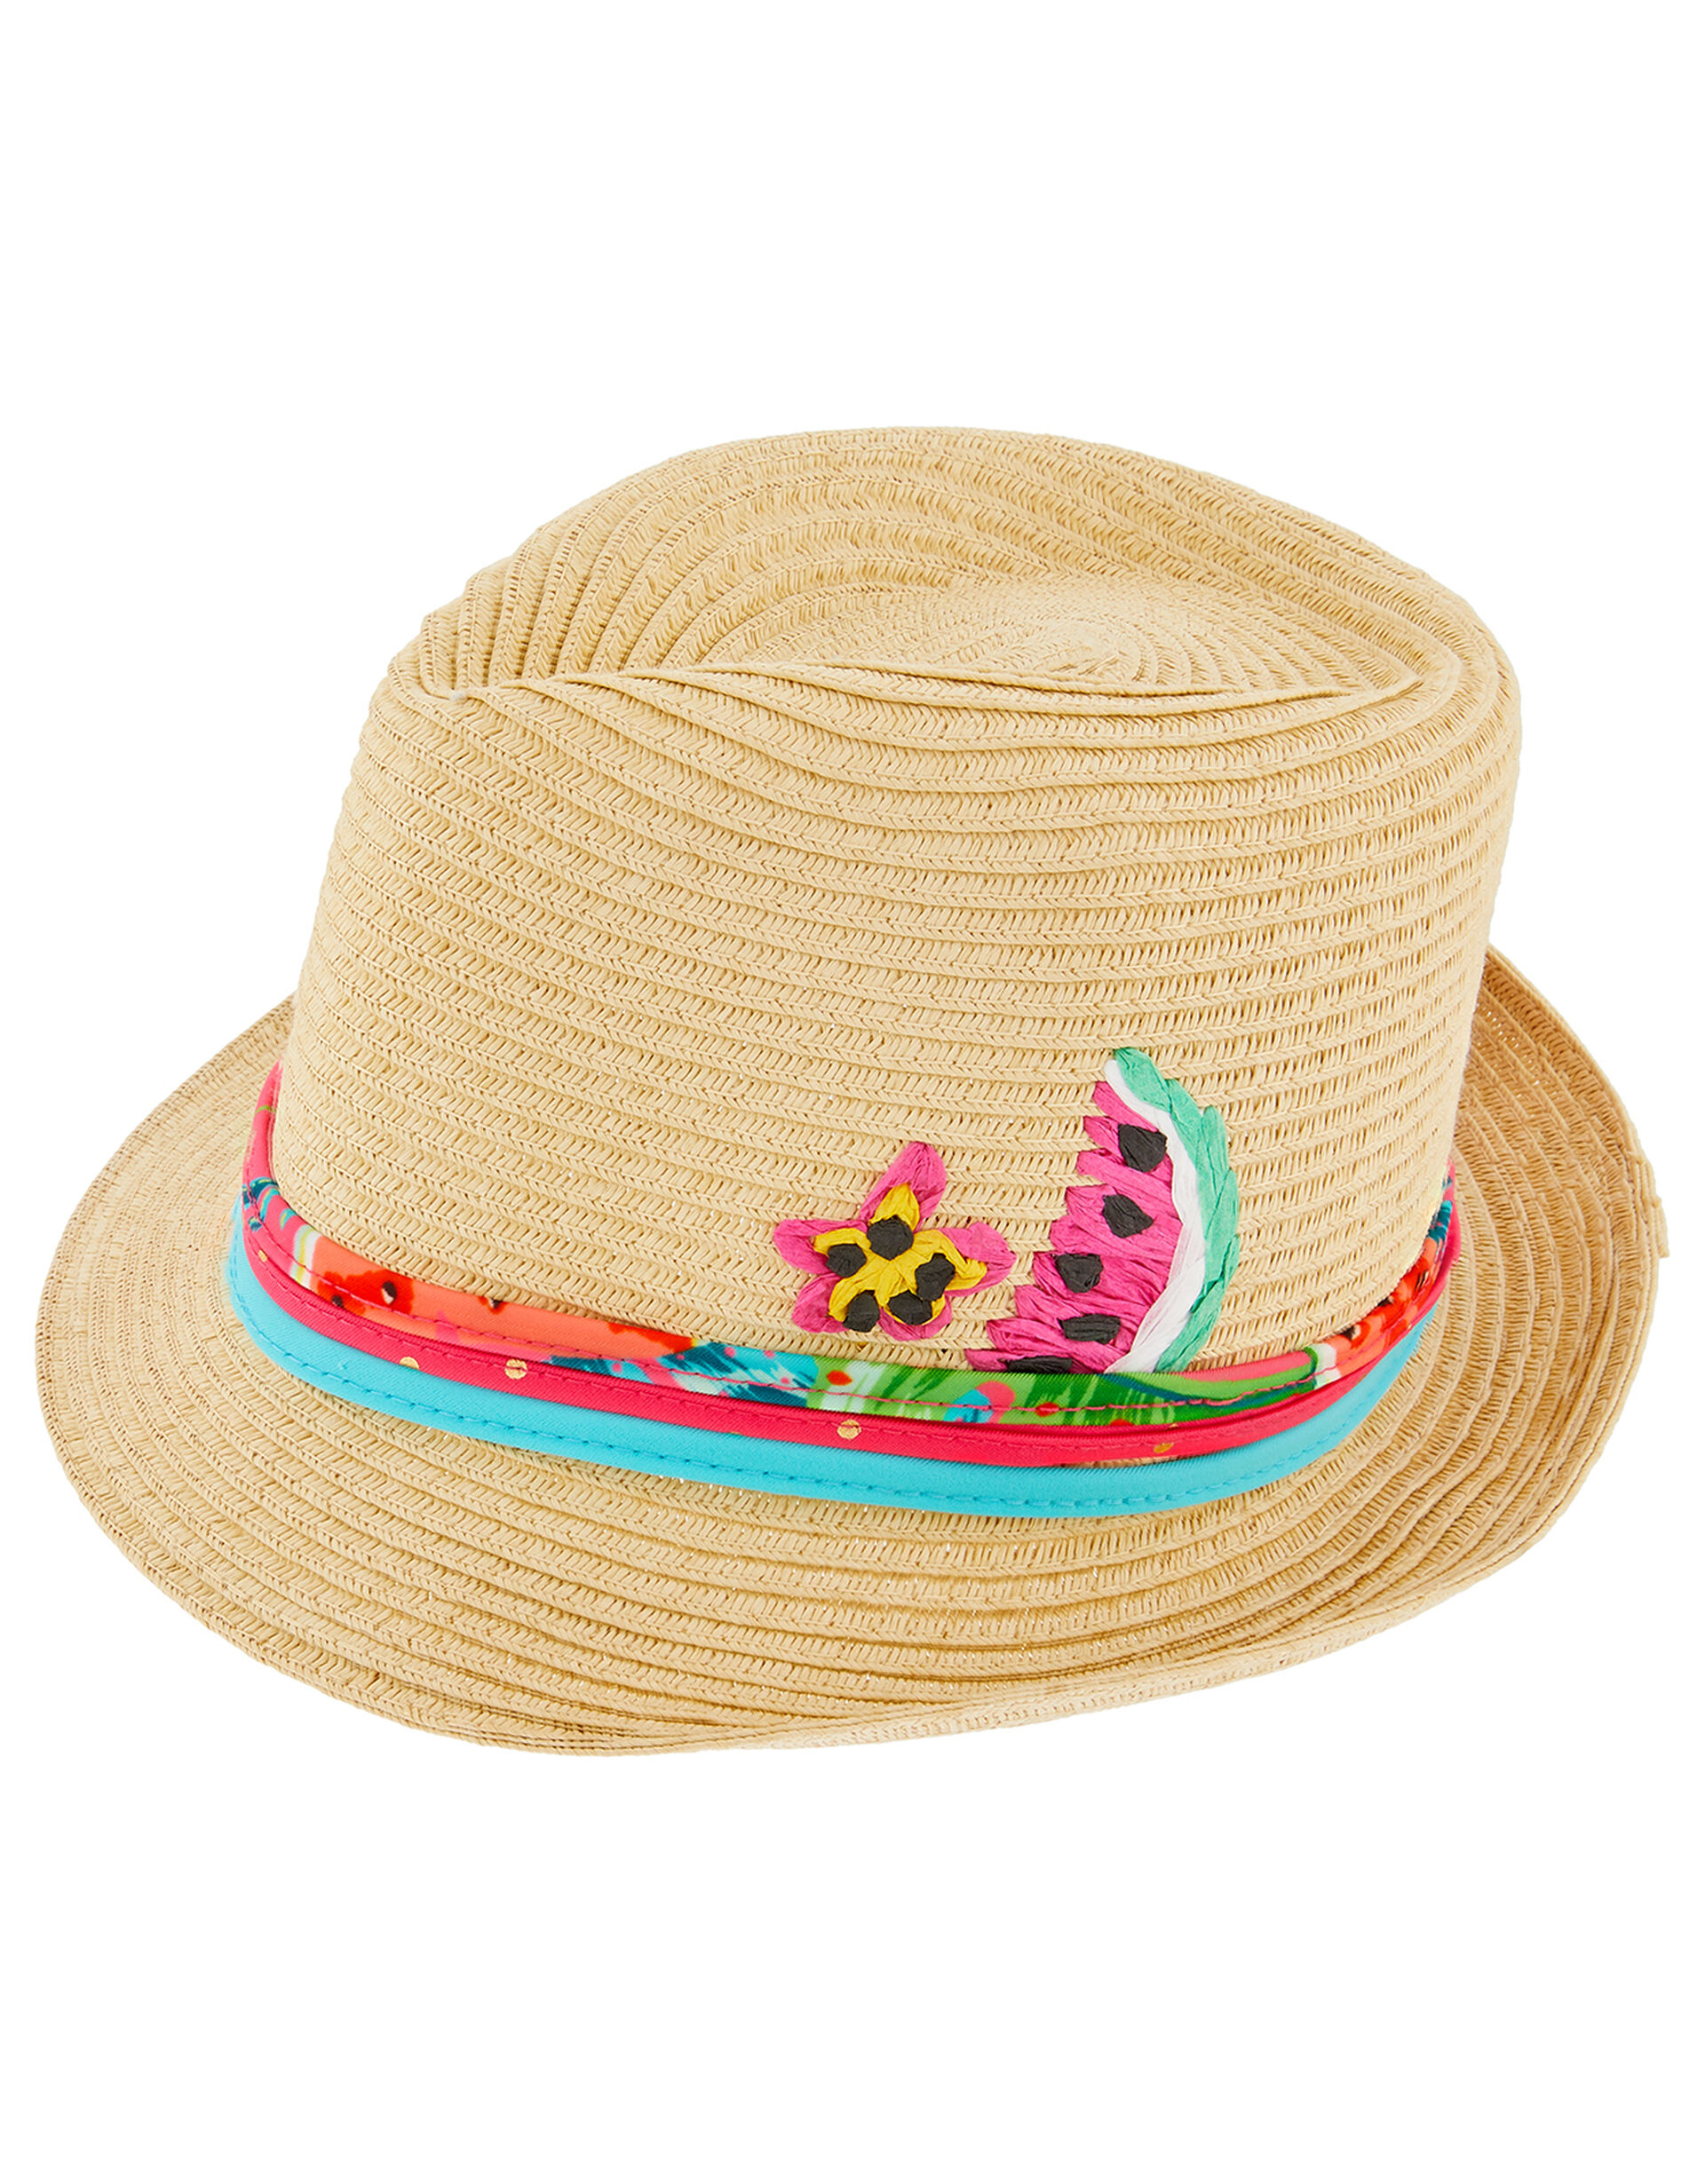 Lucy Watermelon Straw Hat with Removable Bando, Natural (NATURAL), large